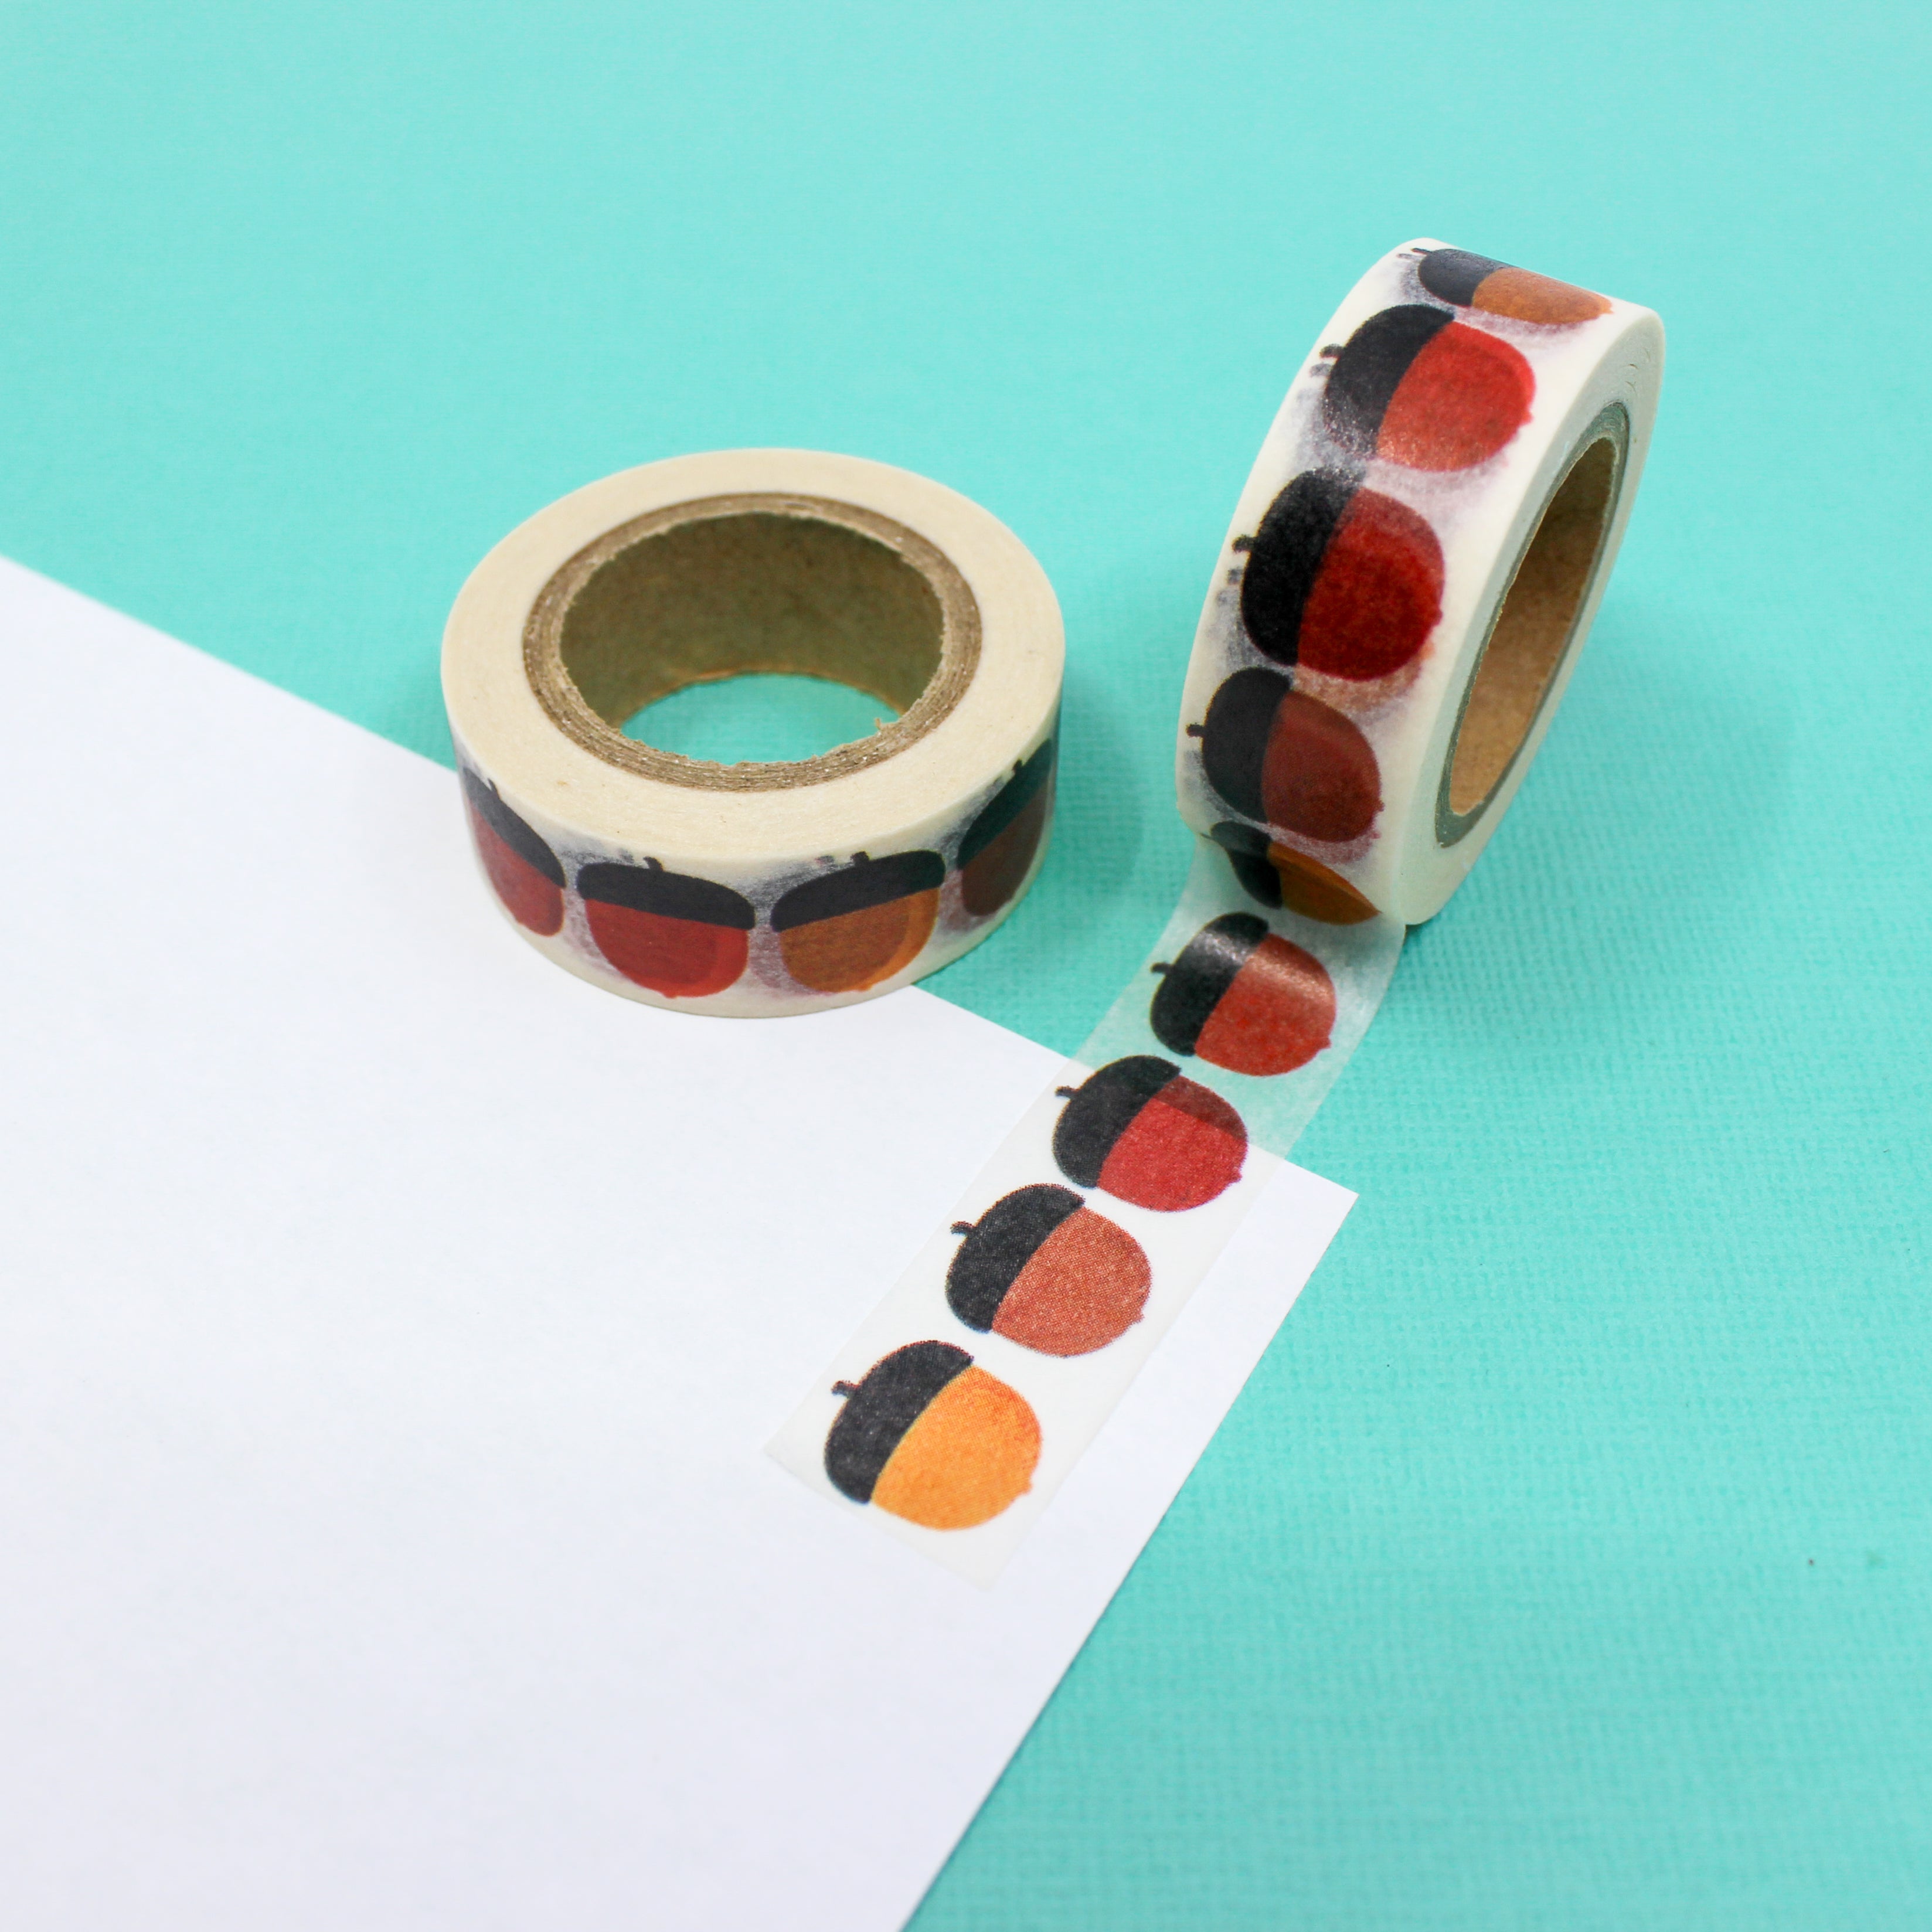 This is a colorful fall and autumn acorn washi tape from BBB Supplies Craft Shop